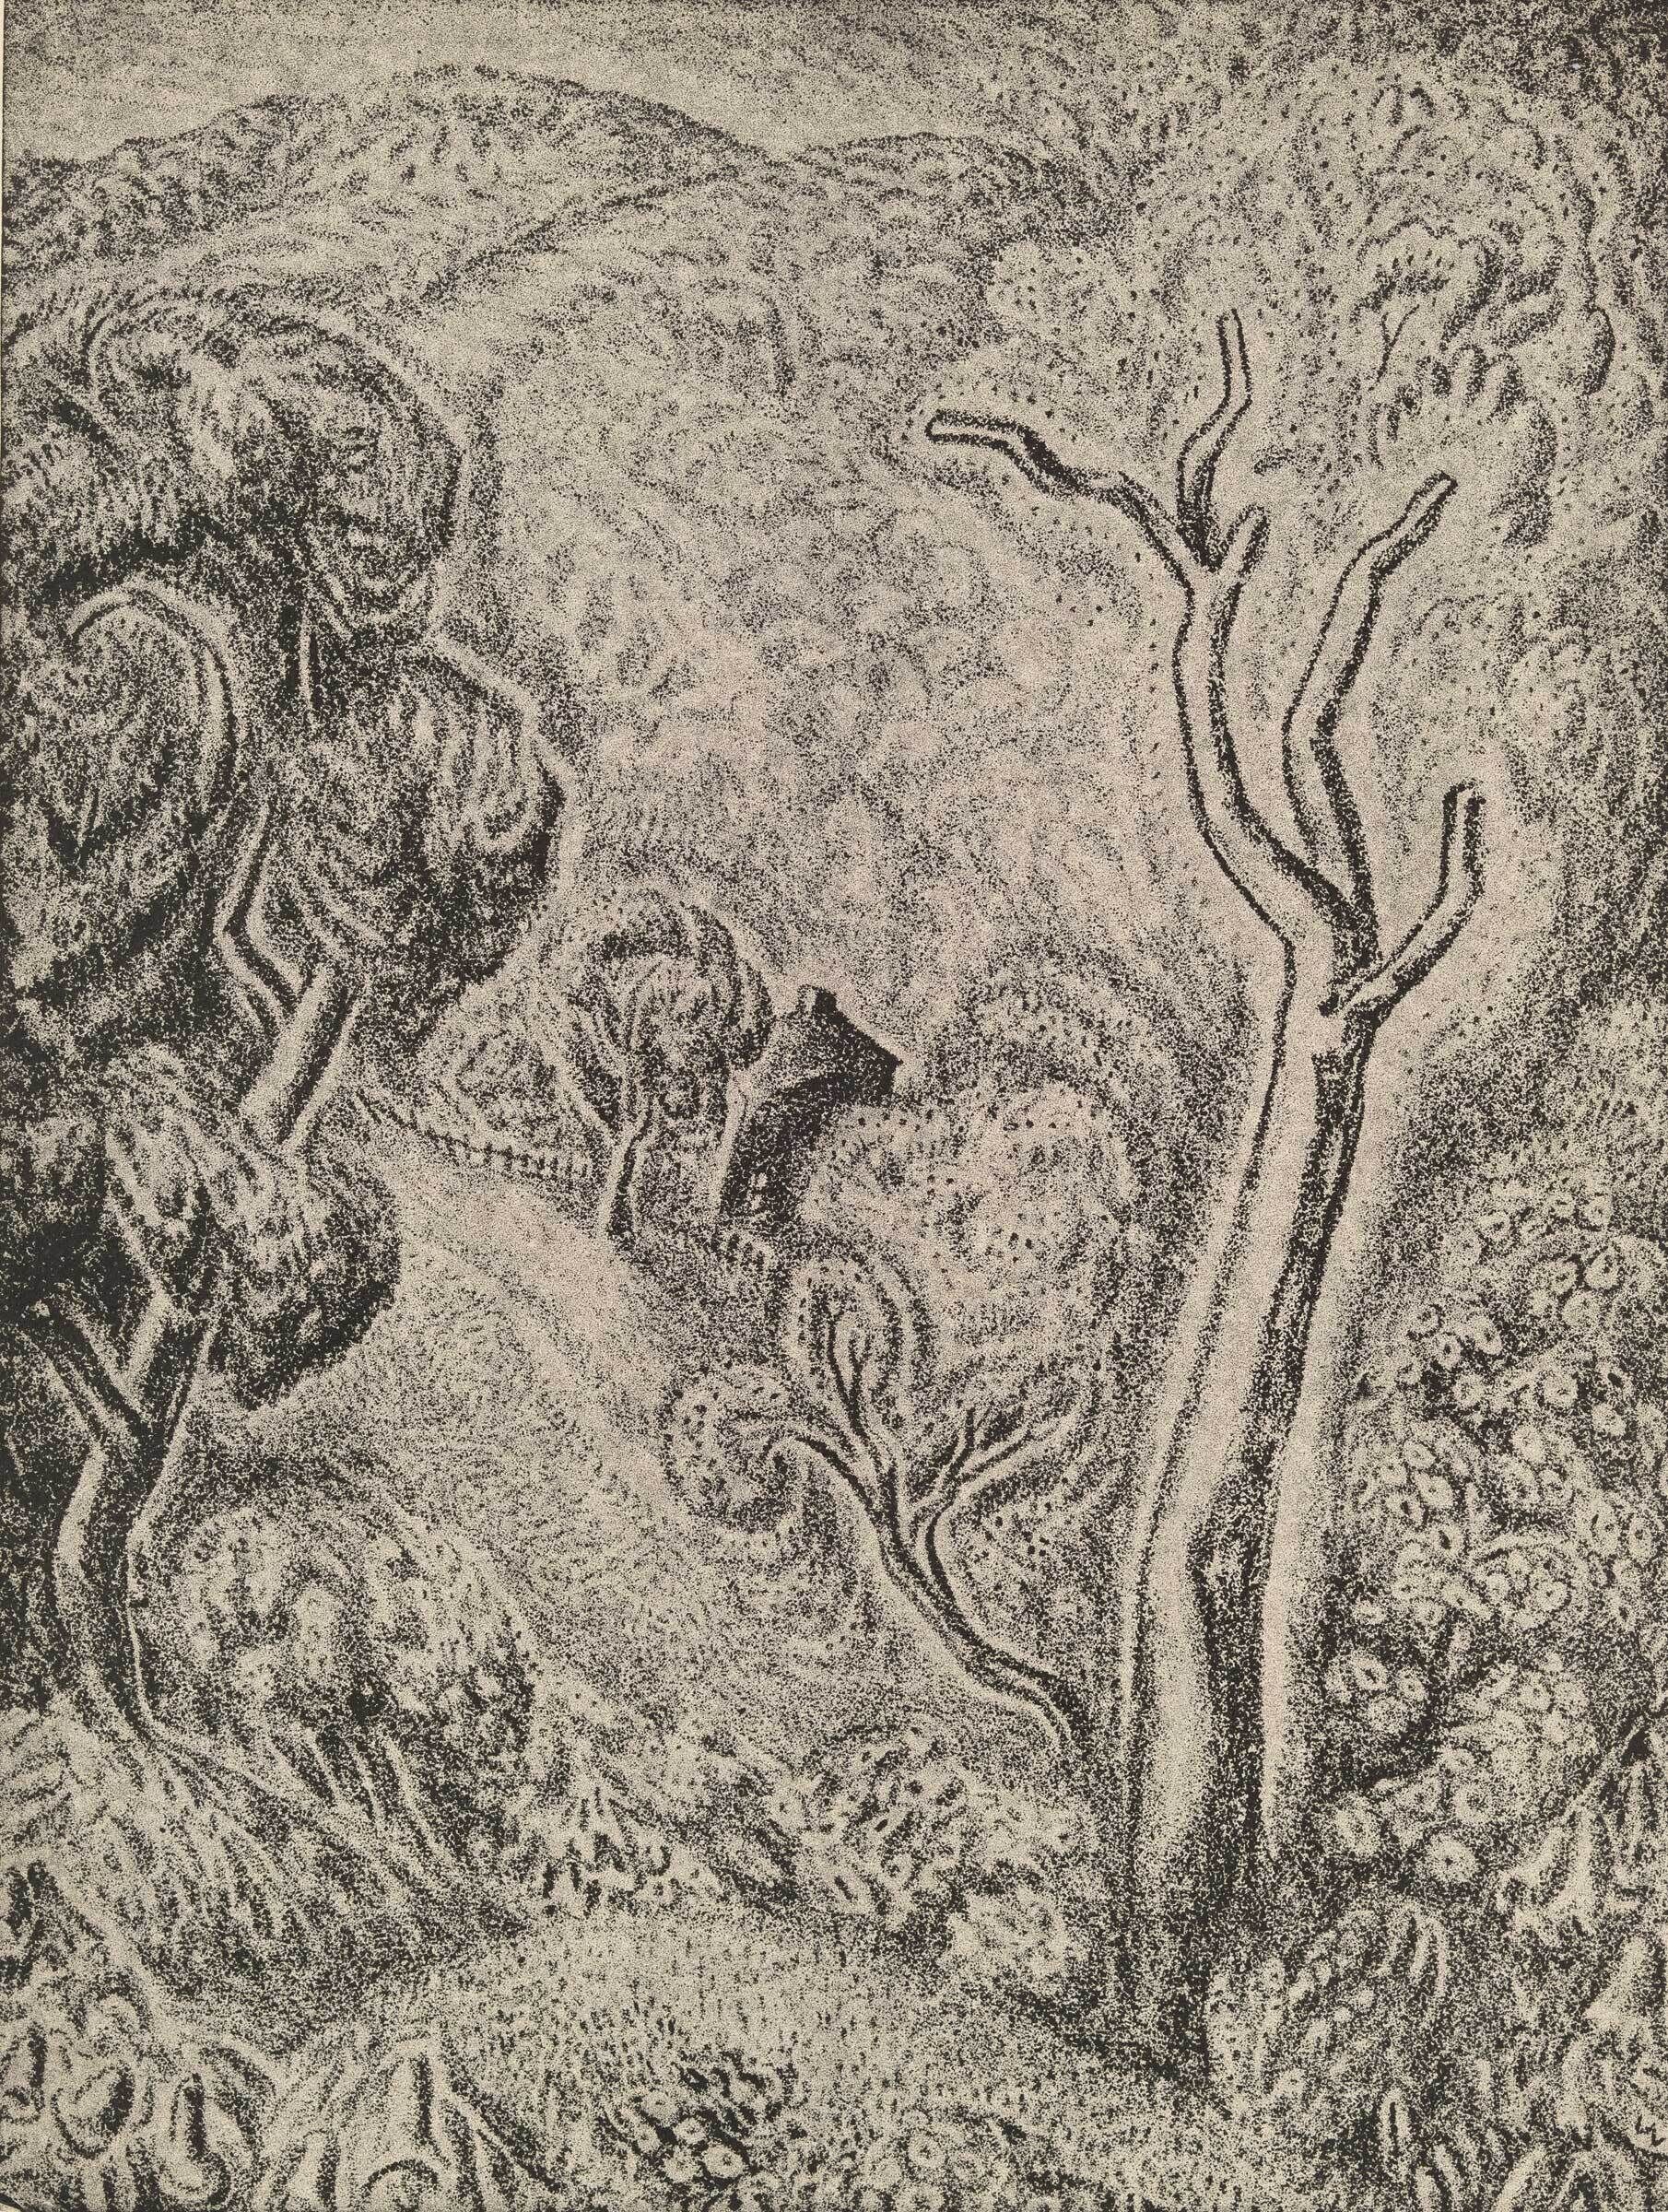 A textured drawing of a barren tree in a dense, patterned forest landscape.